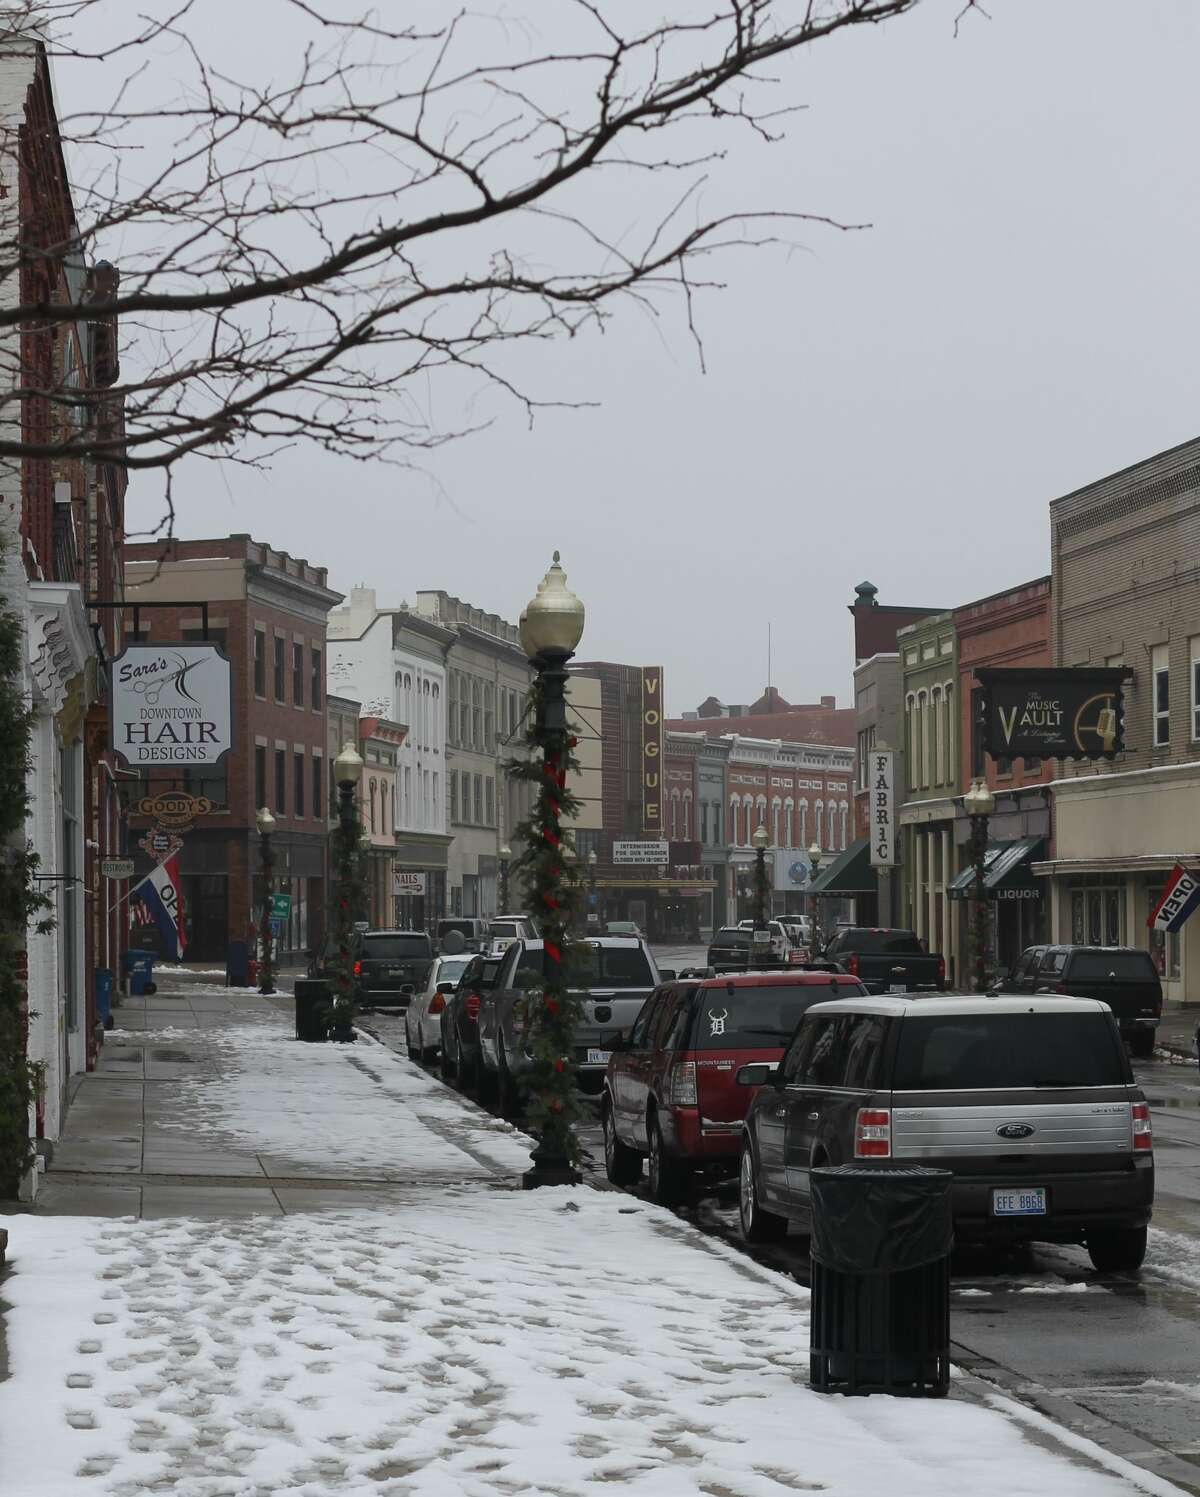 The Manistee Area Chamber of Commerce, as well as local businesses, are encouraging residents and visitors to shop local this holiday season. Studies show that small businesses reinvest $68 back into the community for every $100 spent.